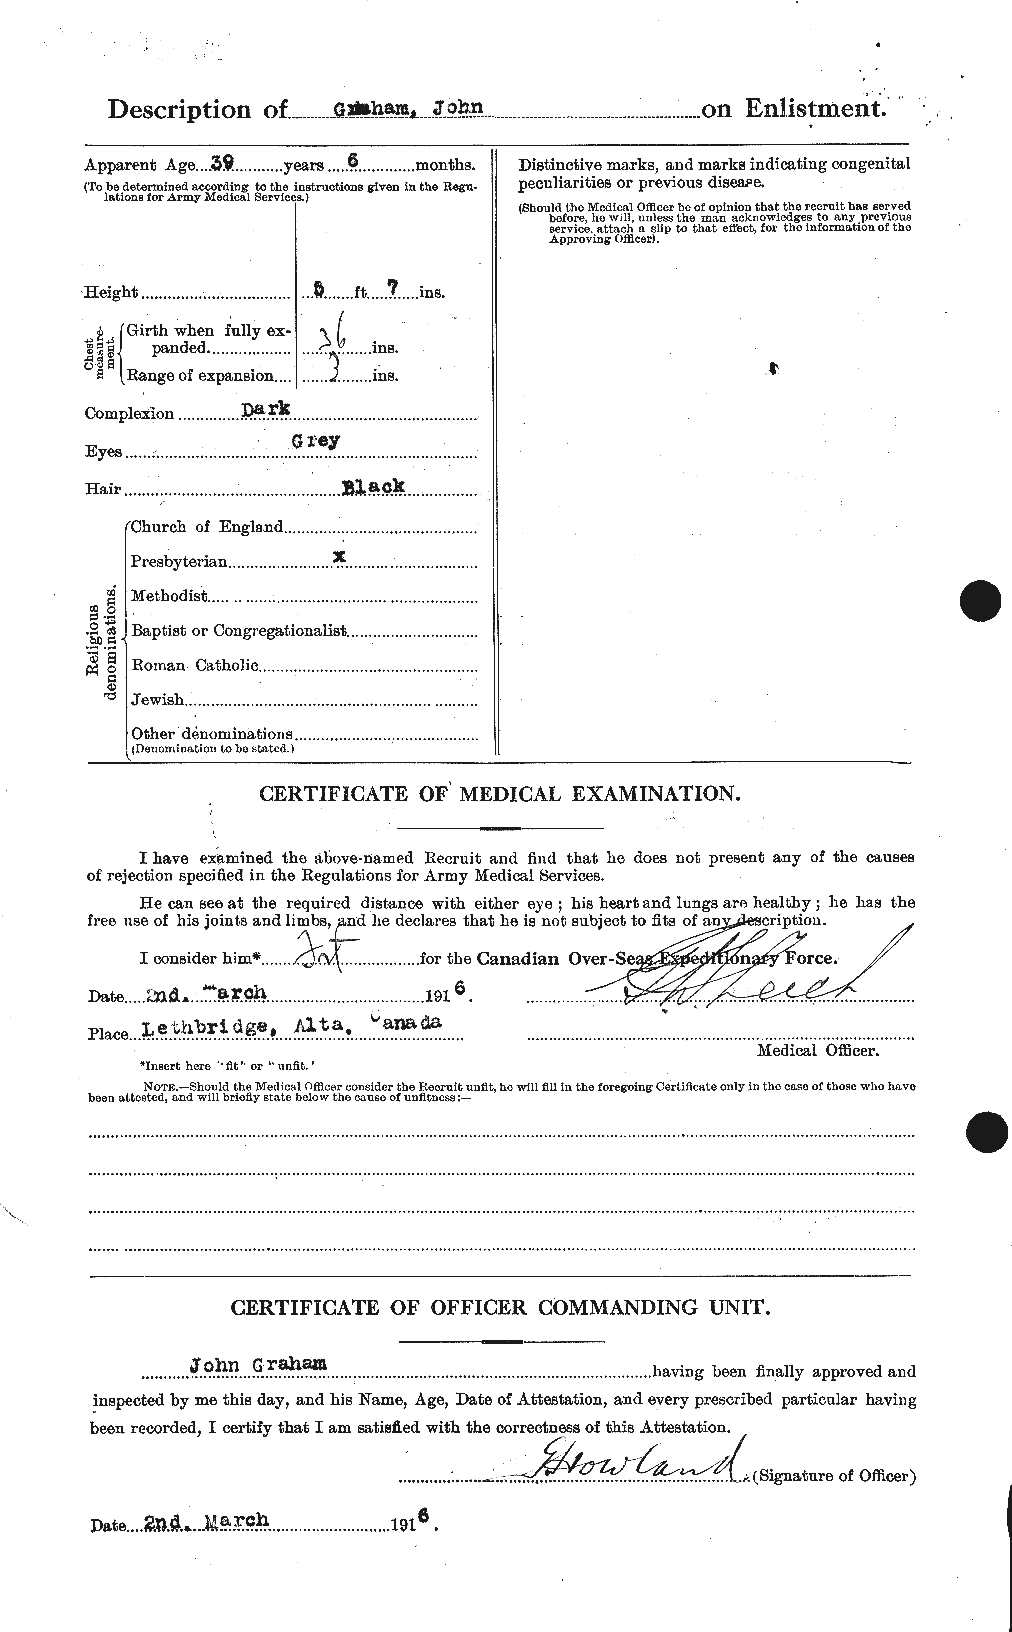 Personnel Records of the First World War - CEF 359143b